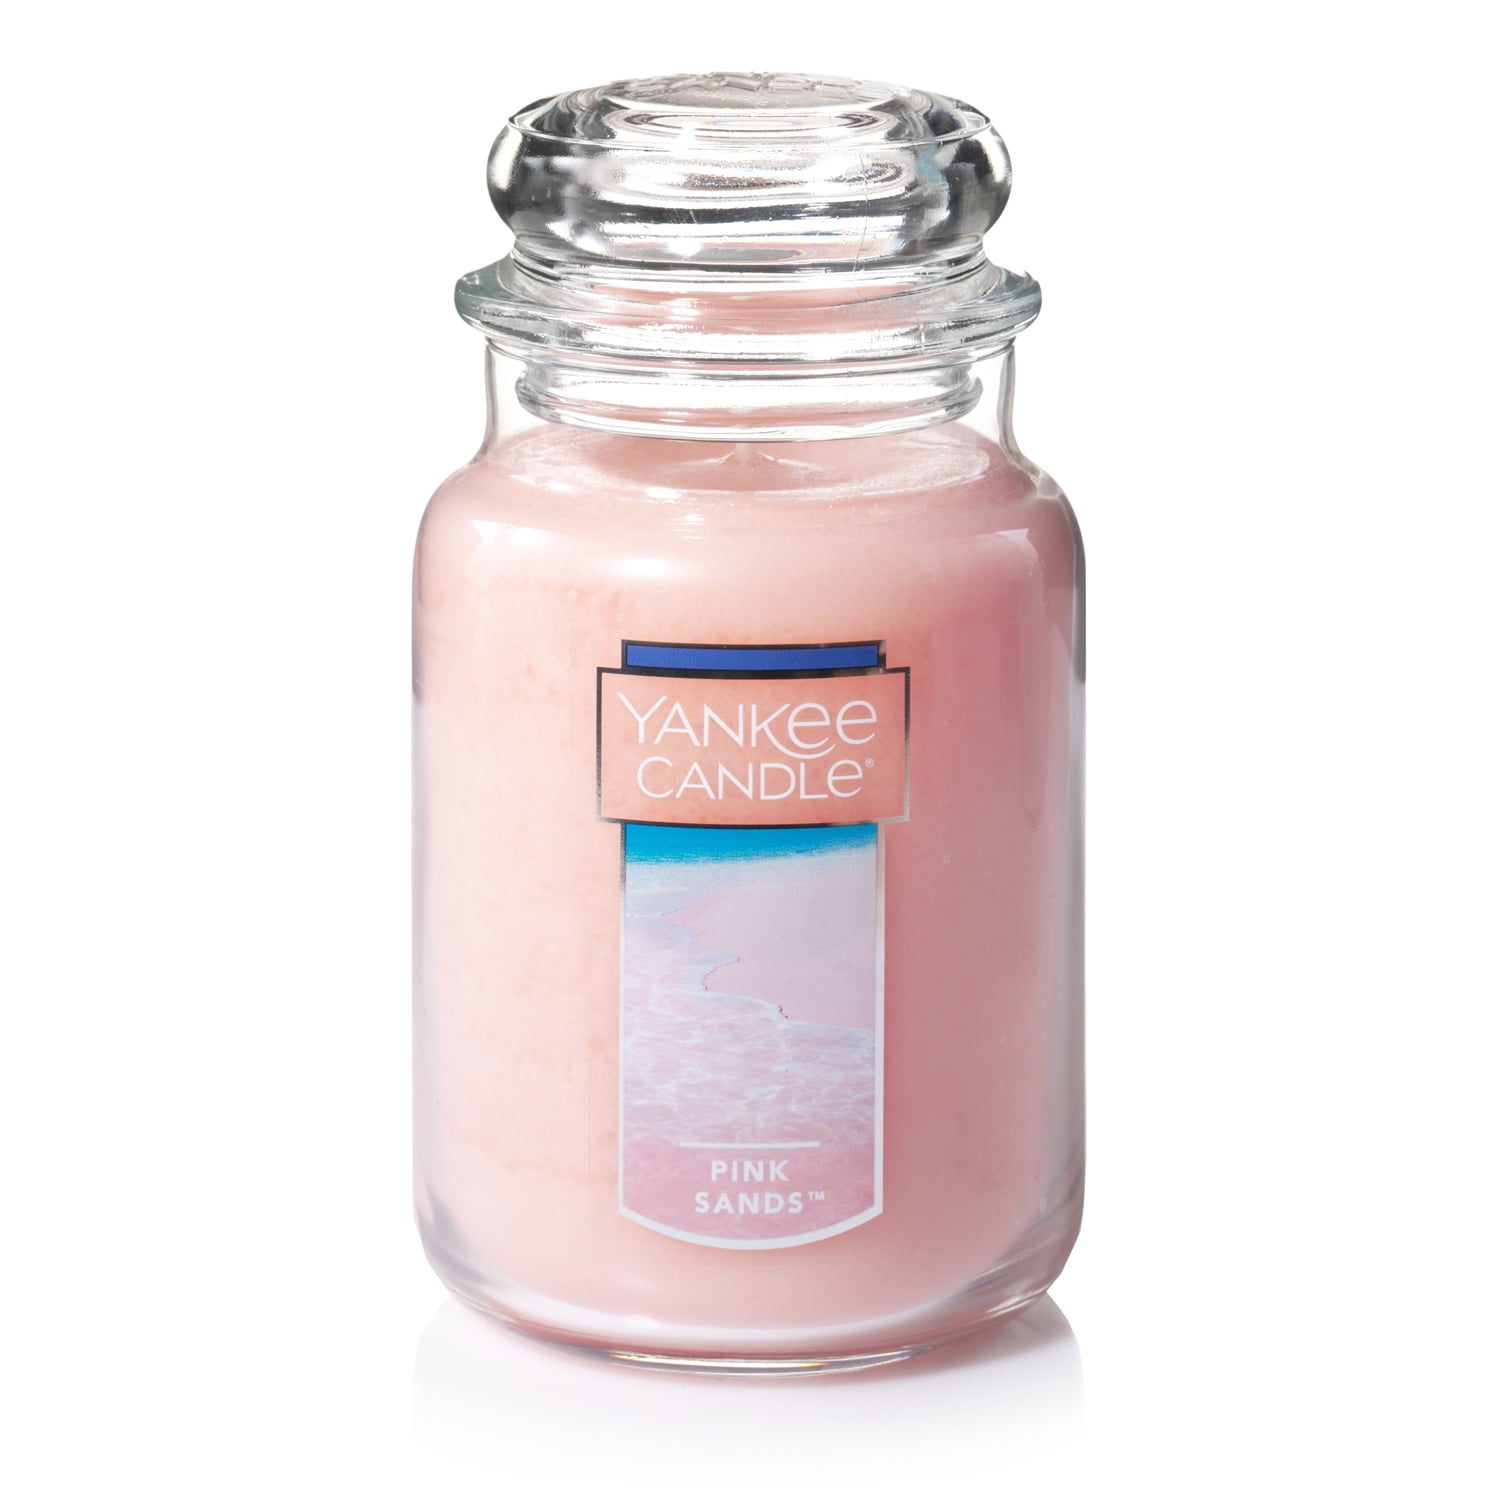 If you love Pink Sands by Yankee, - Scent-sation Wax